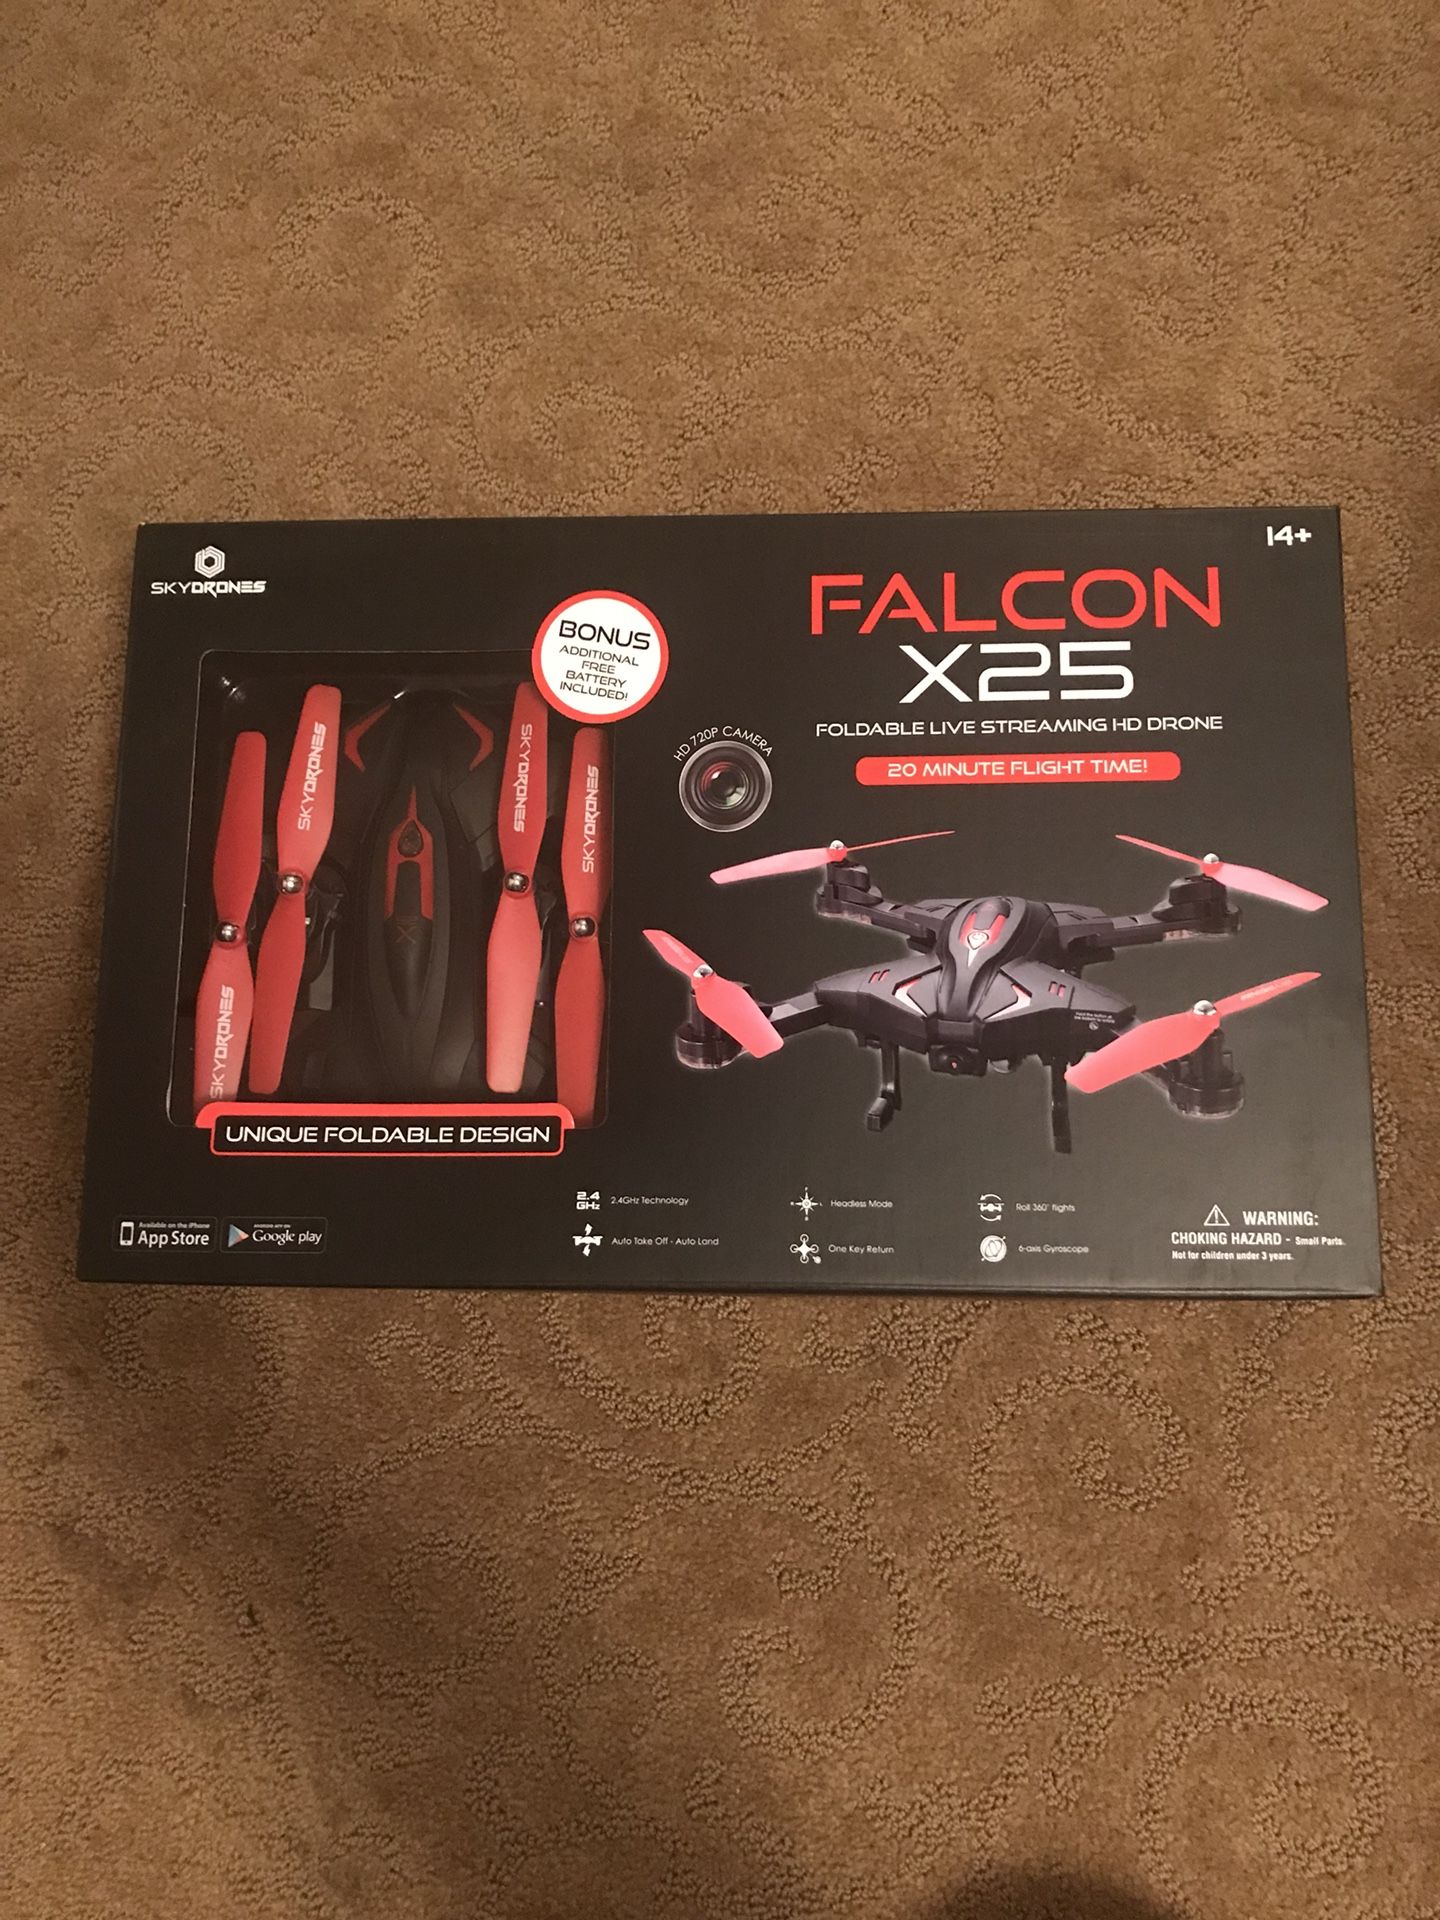 This week only special Falcon X25 Drone plus u can pick between FXmini drone or 3D virtual reality